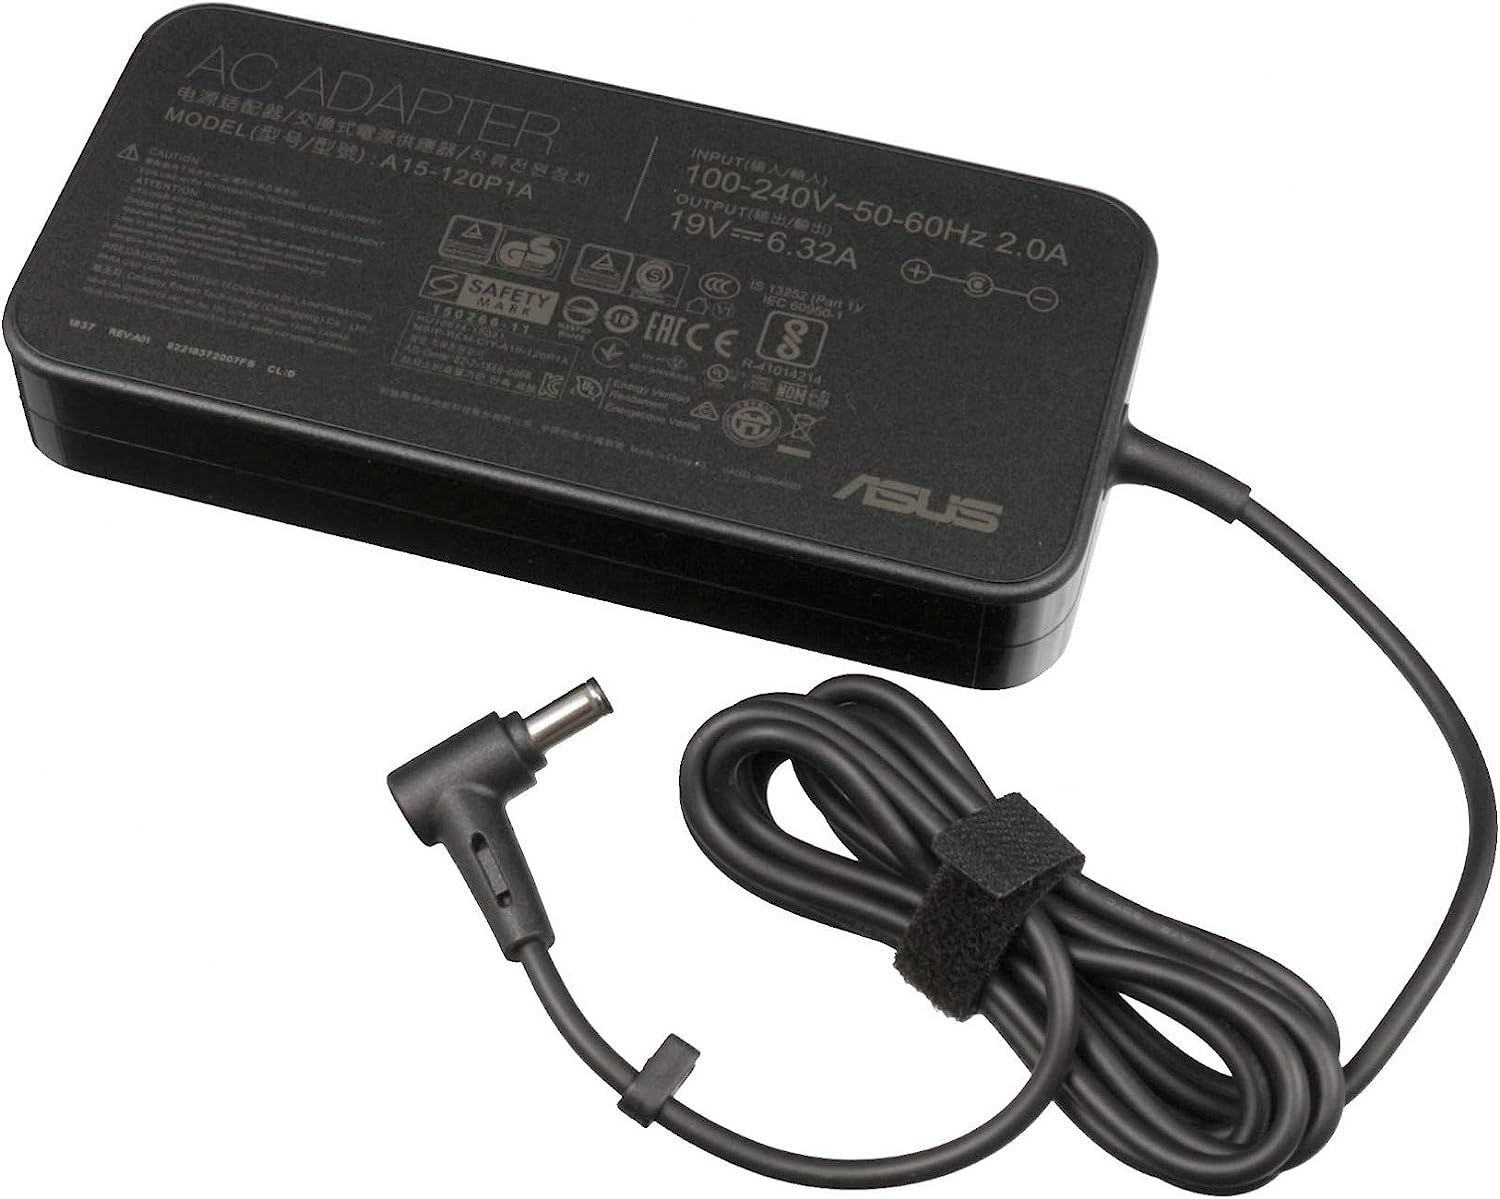 0A001-00065400 - AC Adapter Asus 19.5V 9.23A 180W (0A001-00065400)